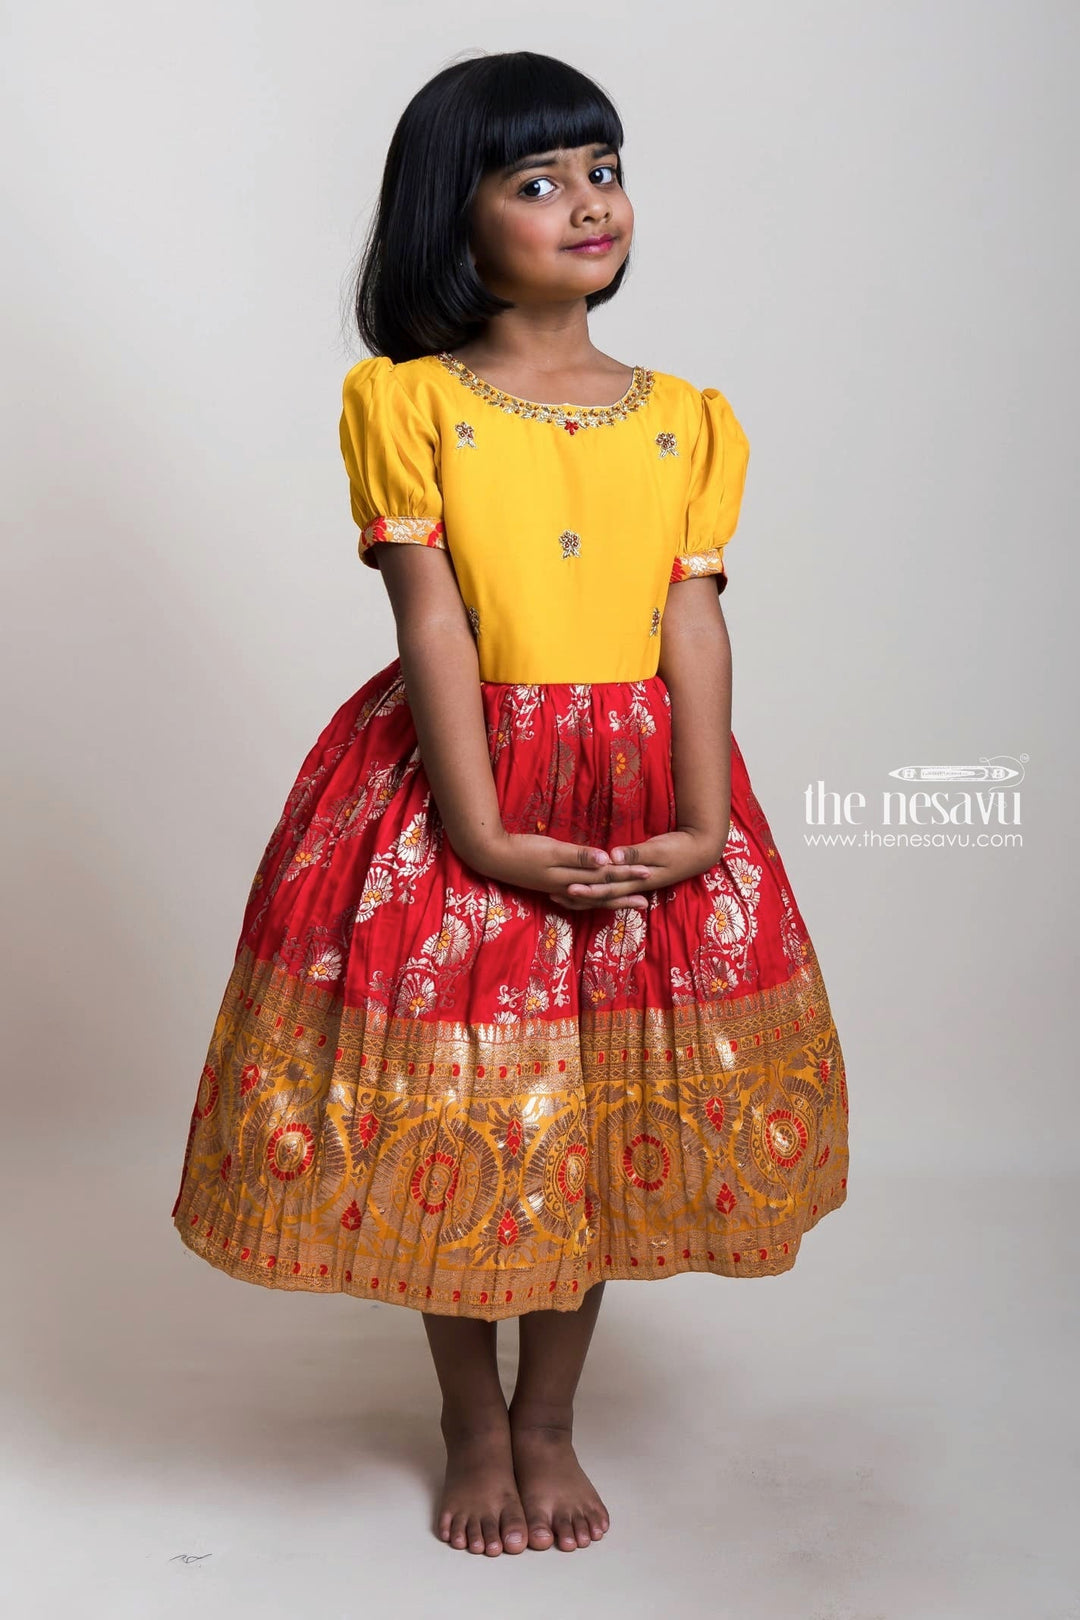 The Nesavu Silk Party Frock Embroidered Yellow Yoke And Red Brocade Printed Semi-Silk Frocks For Girls Nesavu 16 (1Y) / Red SF482A-16 Banarasi Silk Frocks For Girls 2023| Pongal And Sankranti Collection| The Nesavu